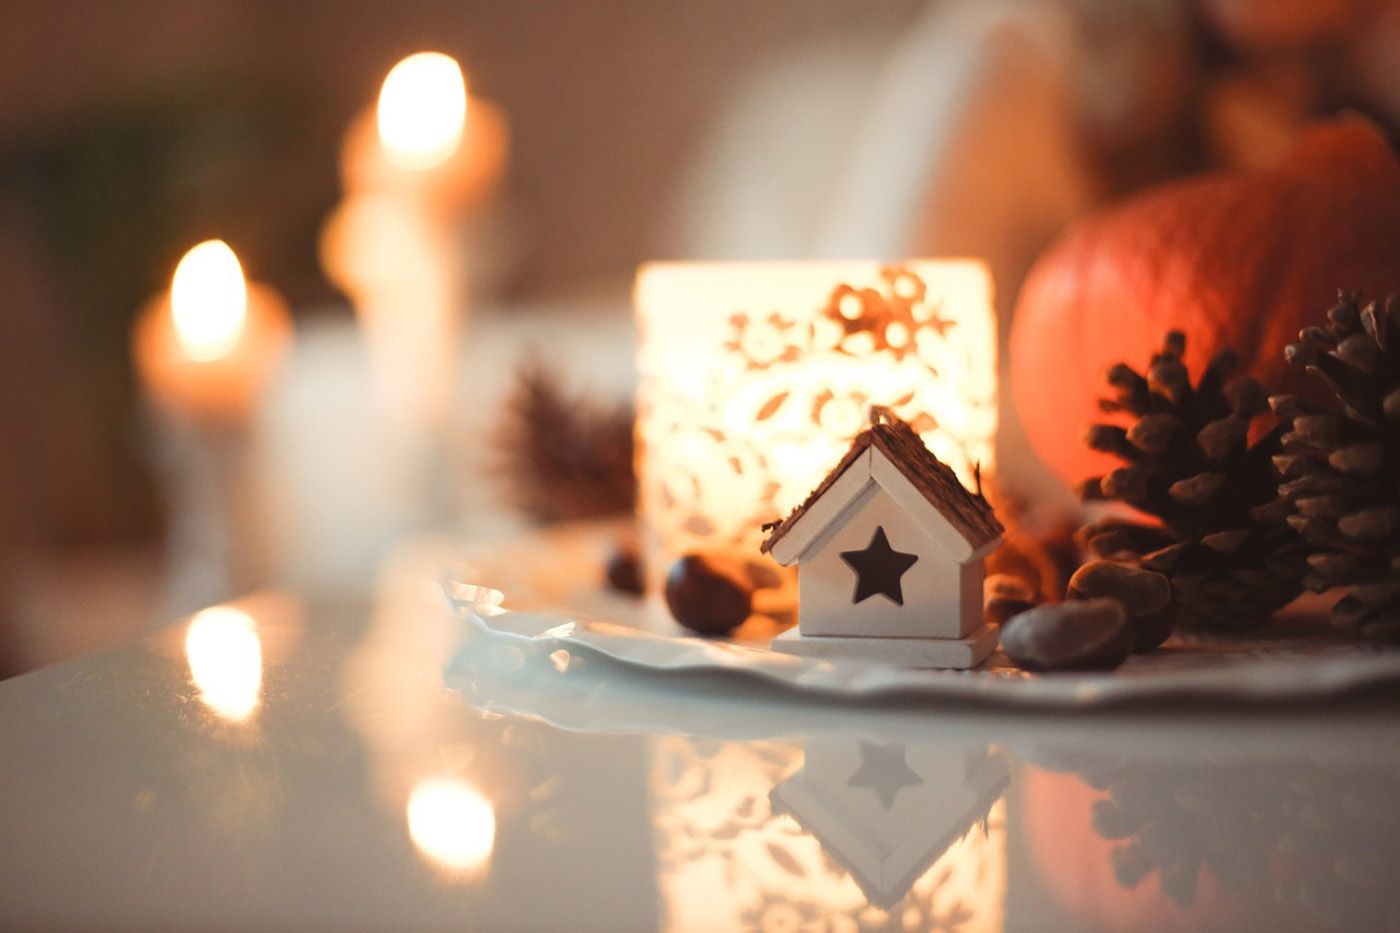 candlelight in autumn scene with pumpkin pine cones and house ornament